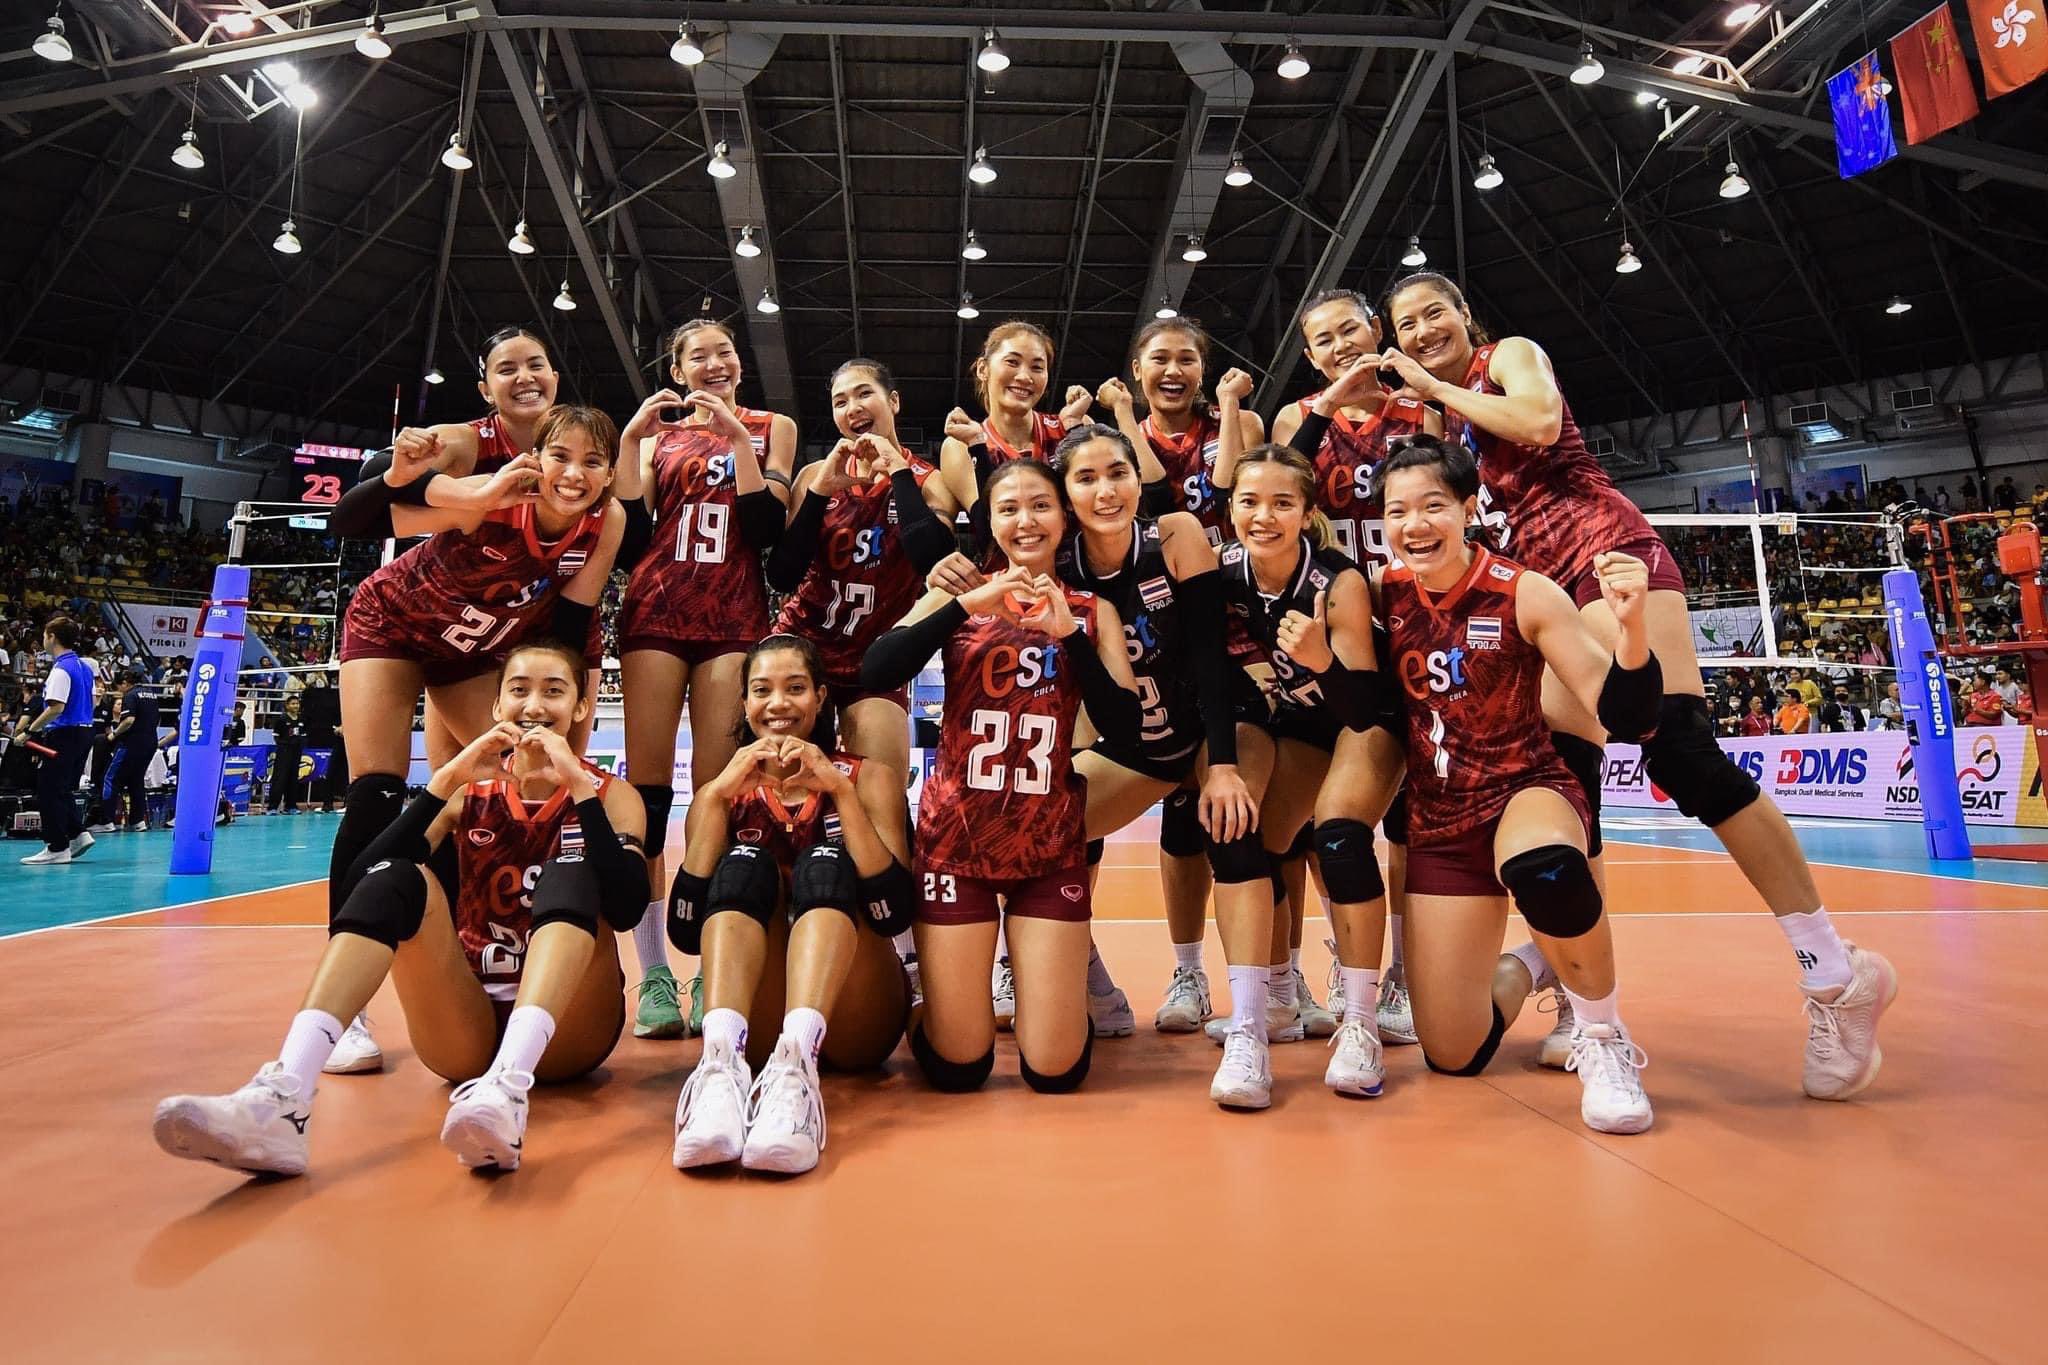 Thai women's volleyball team posing after their win 